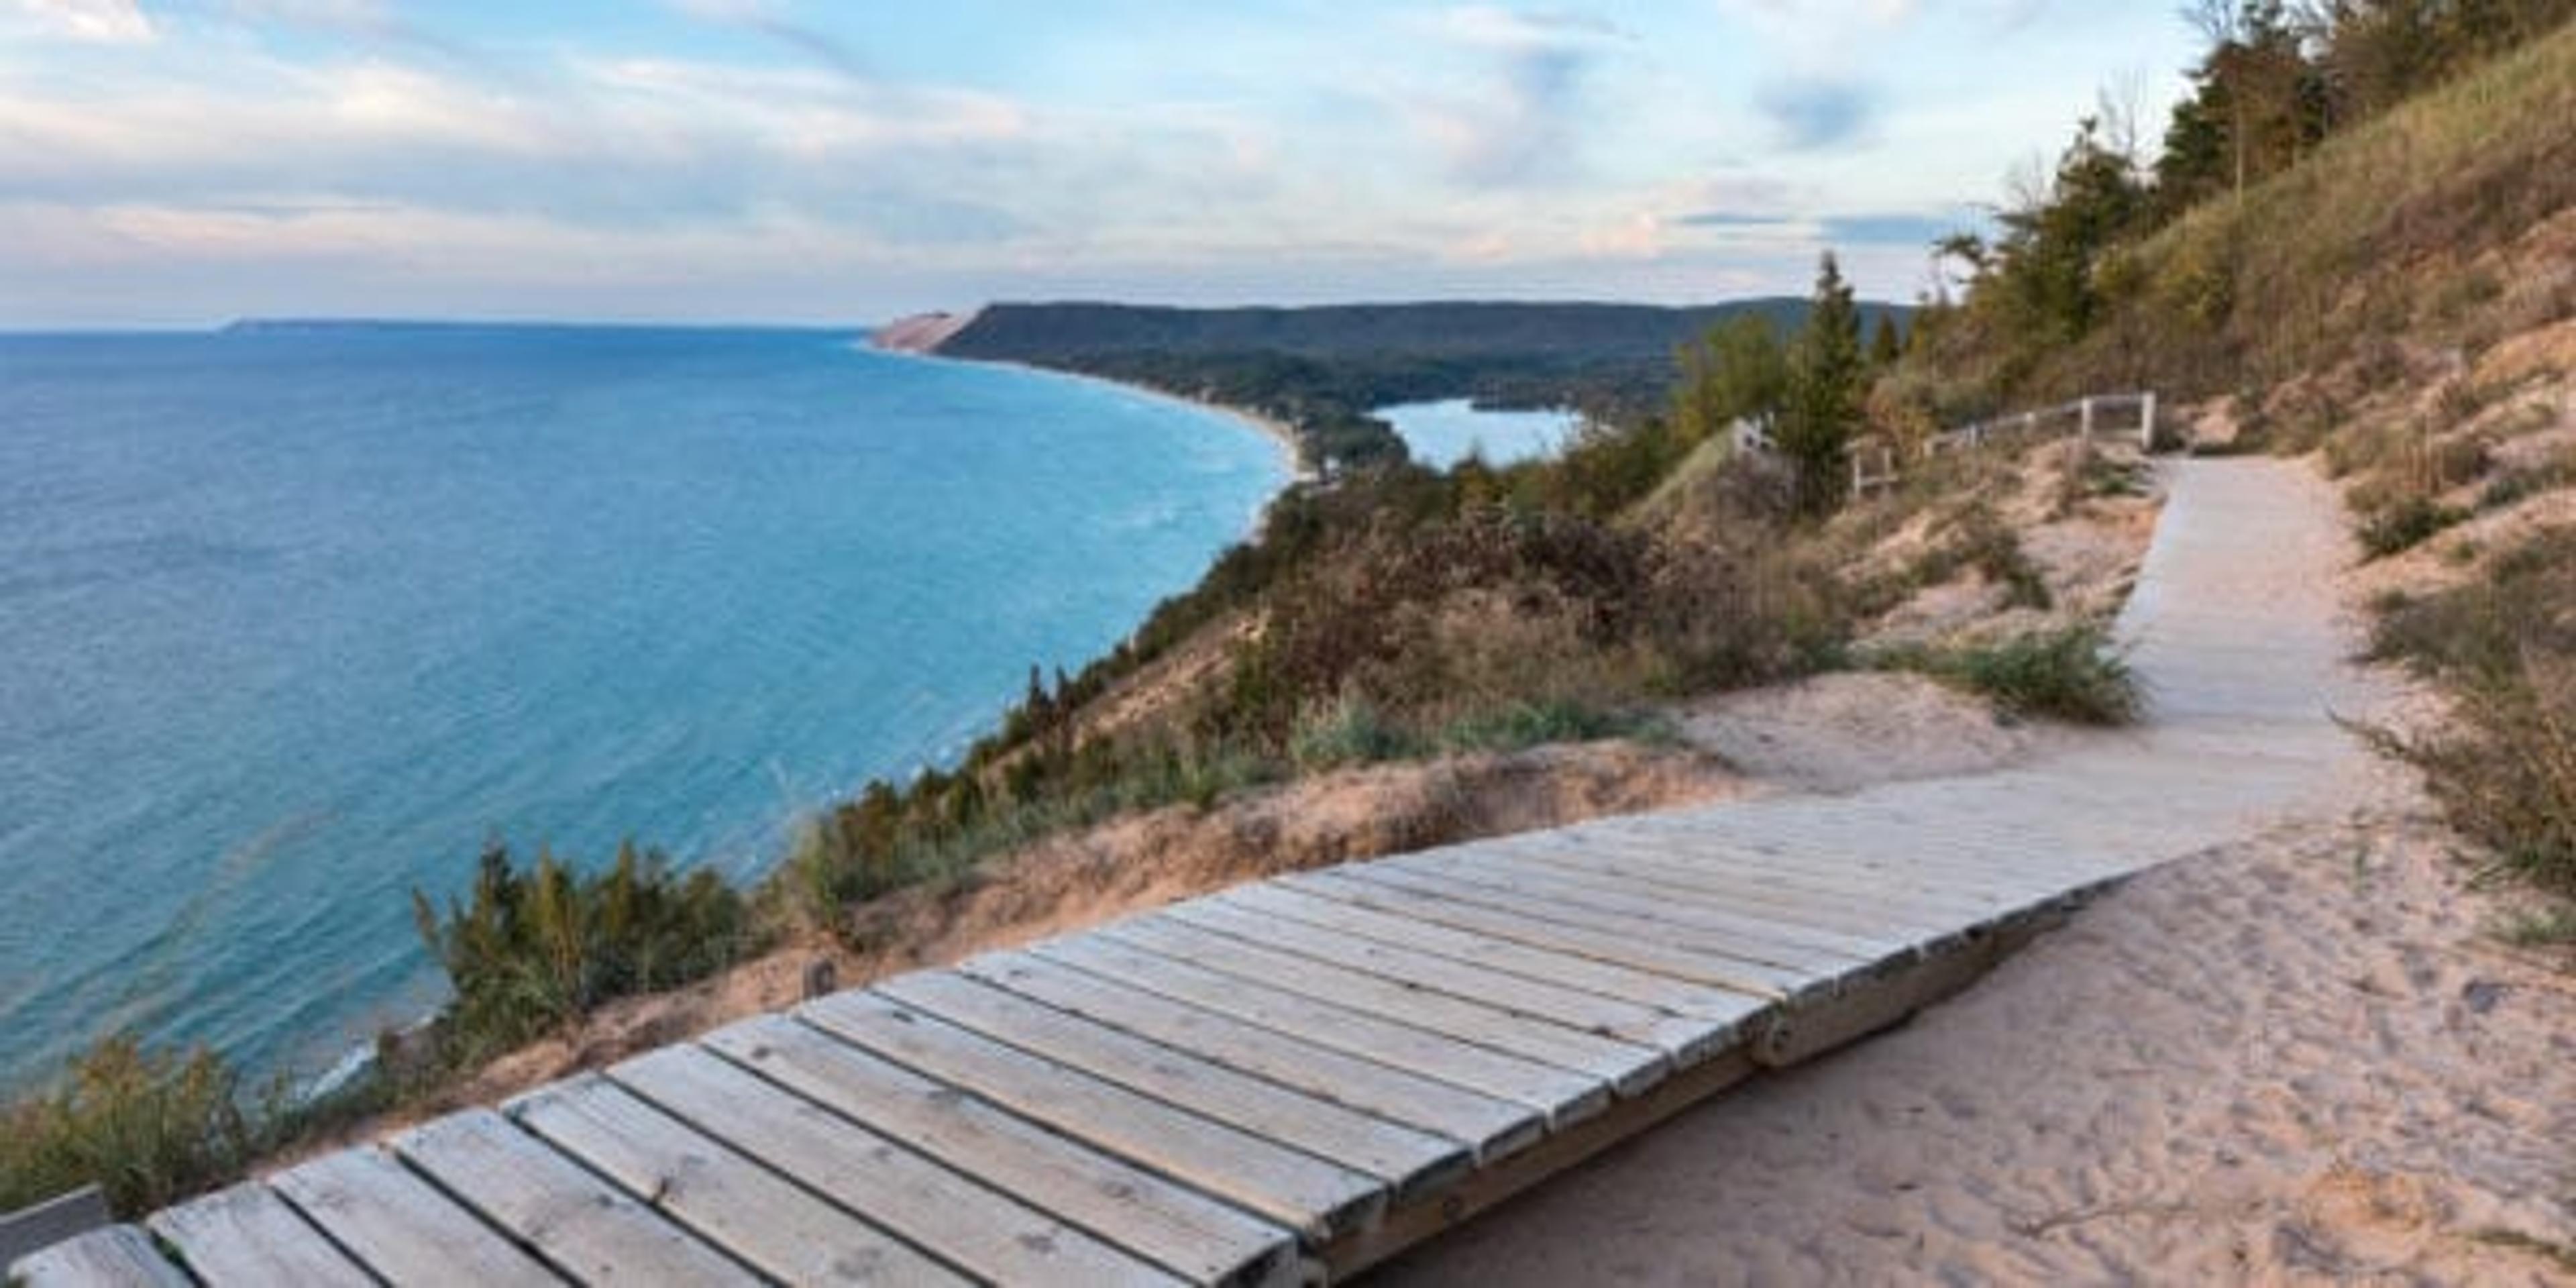 A weathered wooden walkway on the Empire Bluffs Trail is the perfect overlook to see Lake Michigan, the Sleeping Bear Dunes, and the Manitou island